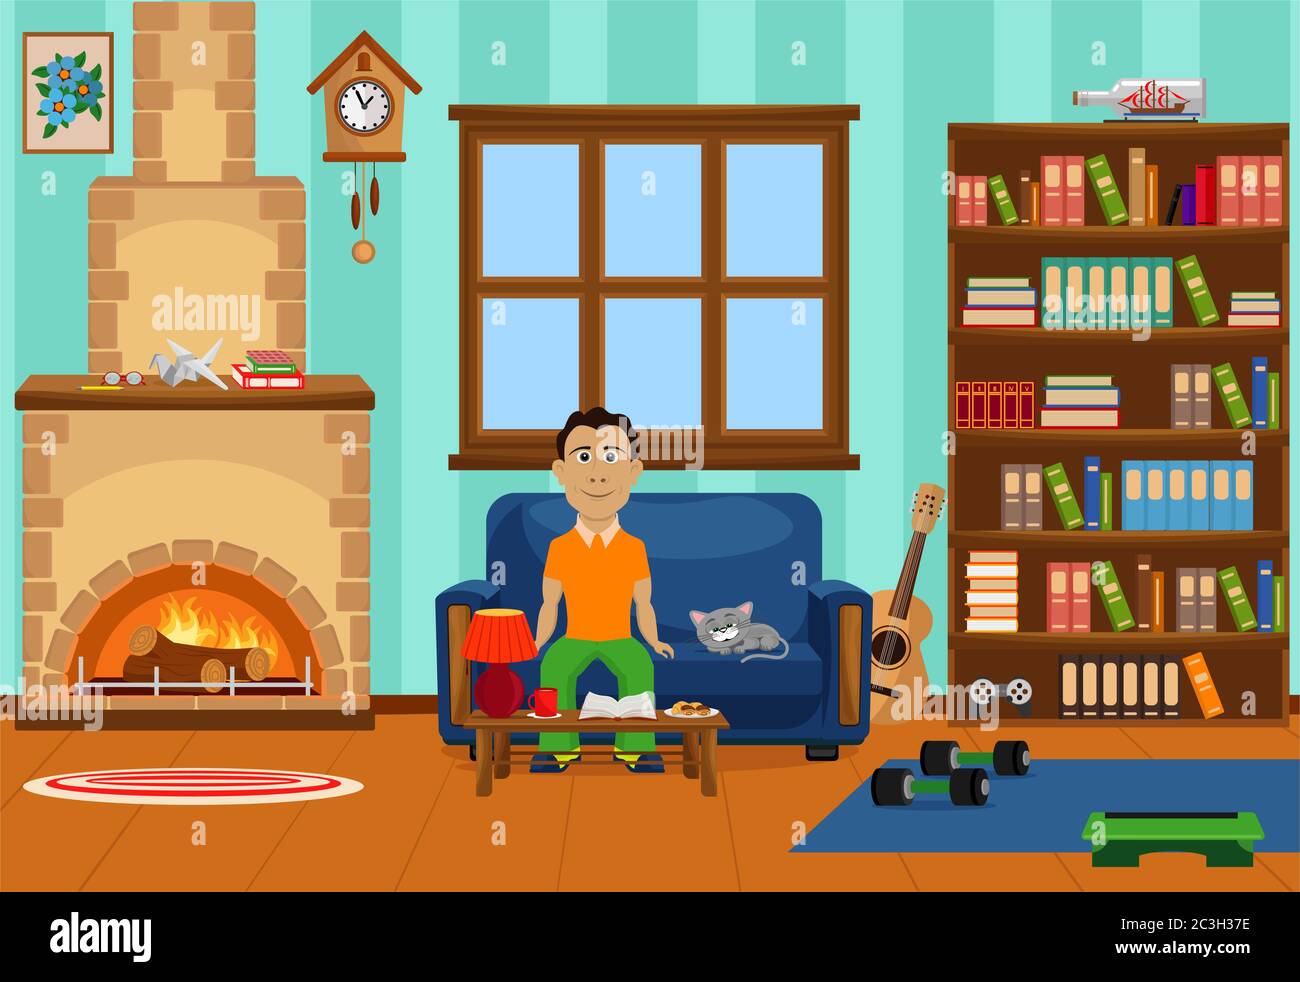 A person is sitting in a chair, reading and having a good time. Vector illustration on the theme of home interior. Stay home. Stock Vector